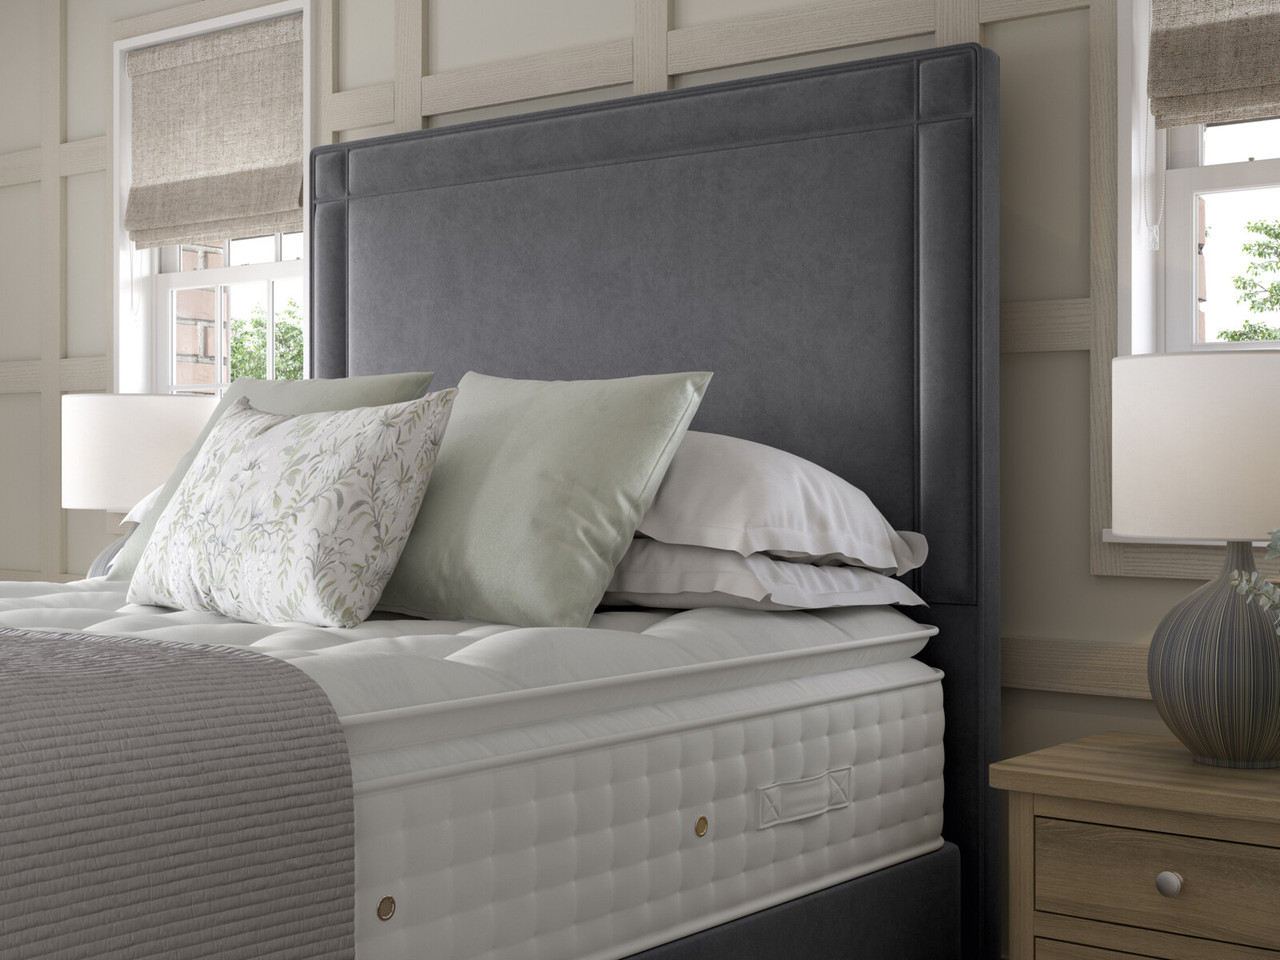 Staples And Co Buckingham Piped Full Length Headboard Small Double London Charcoal